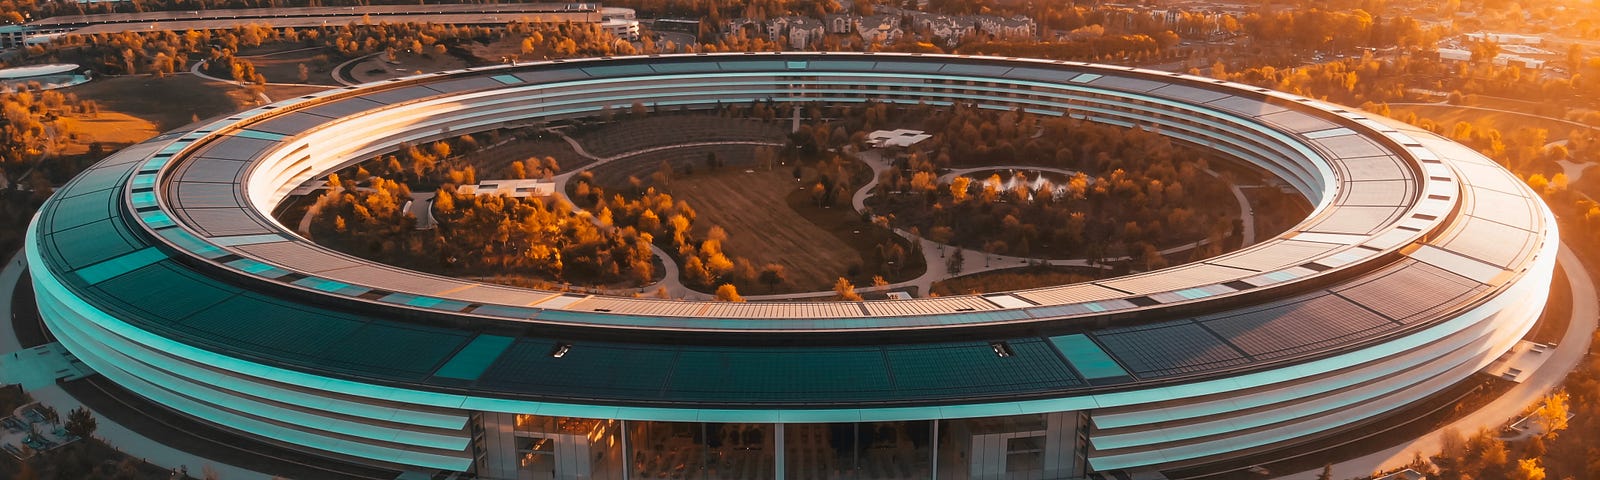 IMAGE: A picture of Apple’s headquarters circular building in a sunset